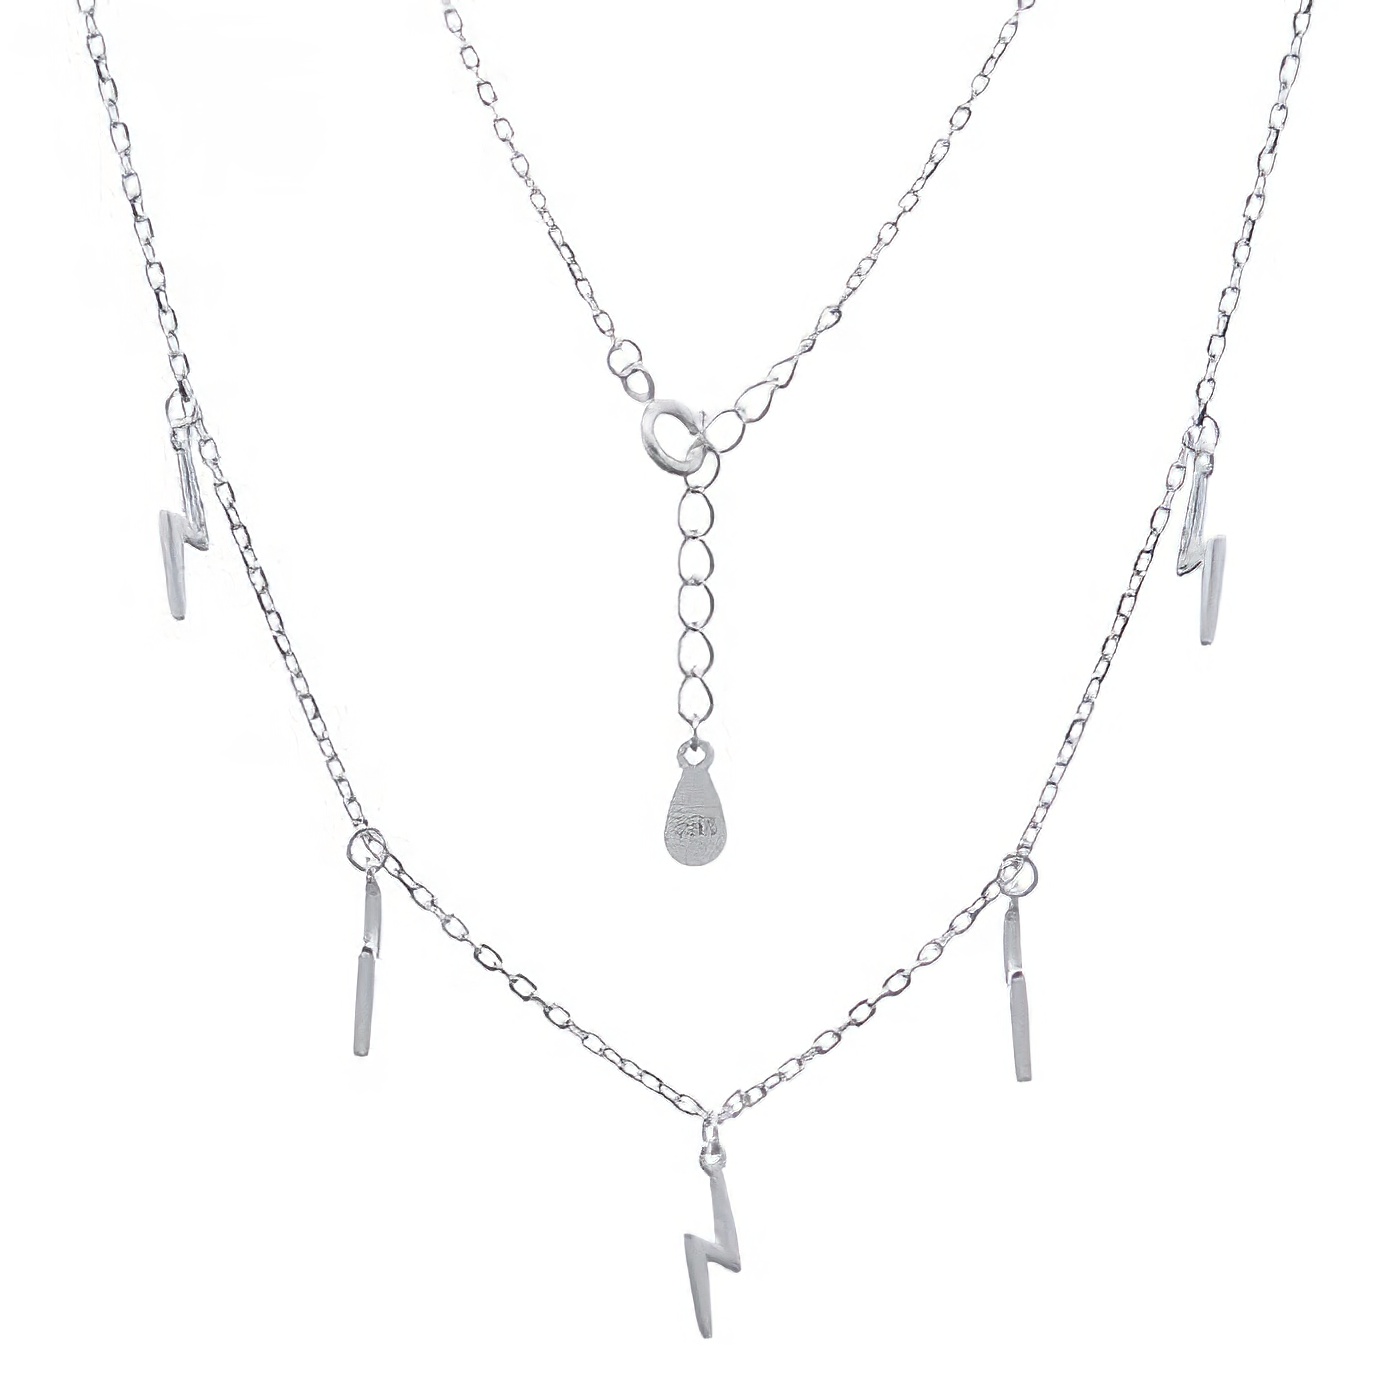 Silver Plated Charm Thunders 925 Chain Necklace by BeYindi 